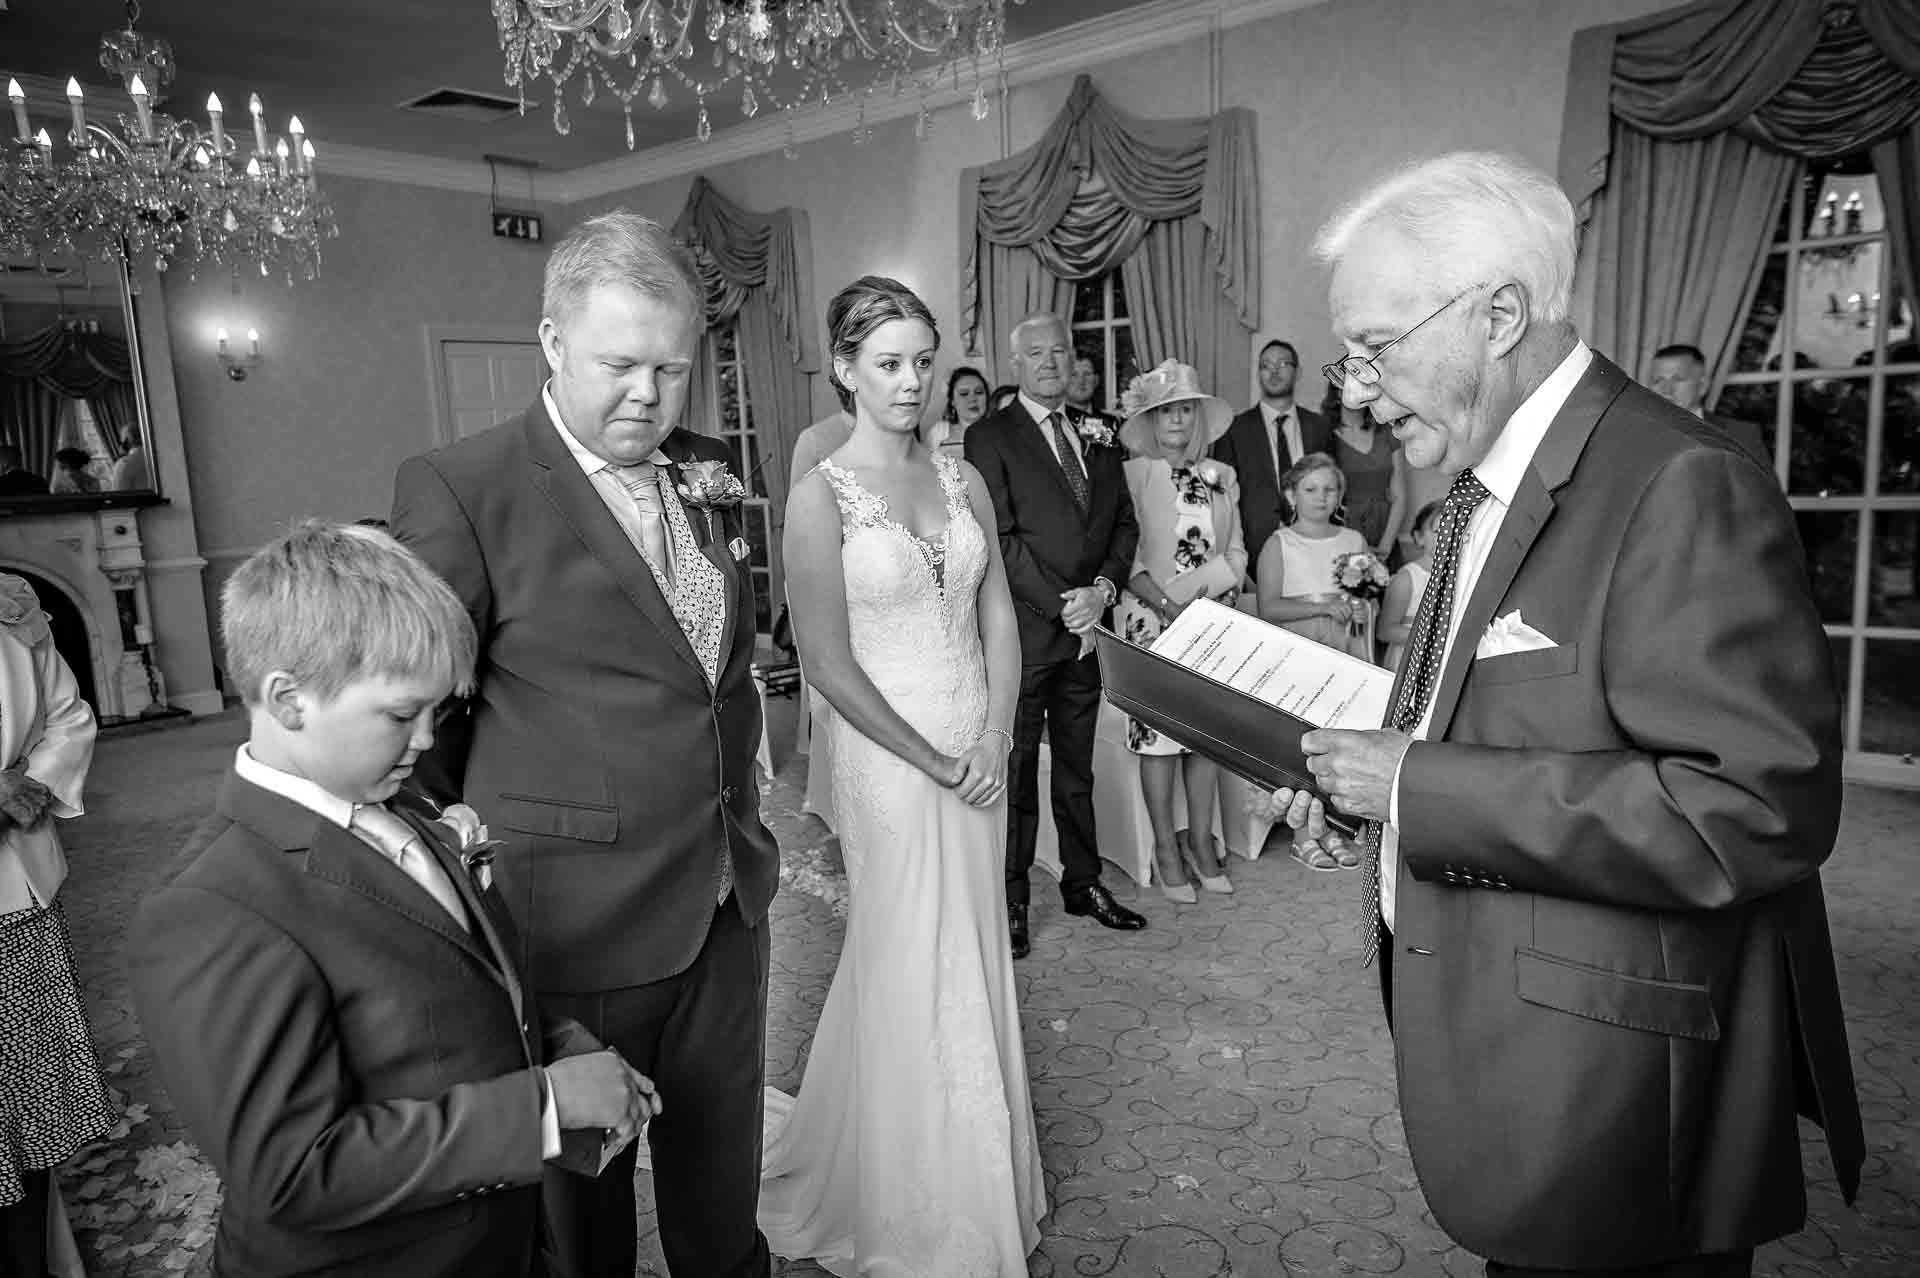 Page boy hands over rings at wedding